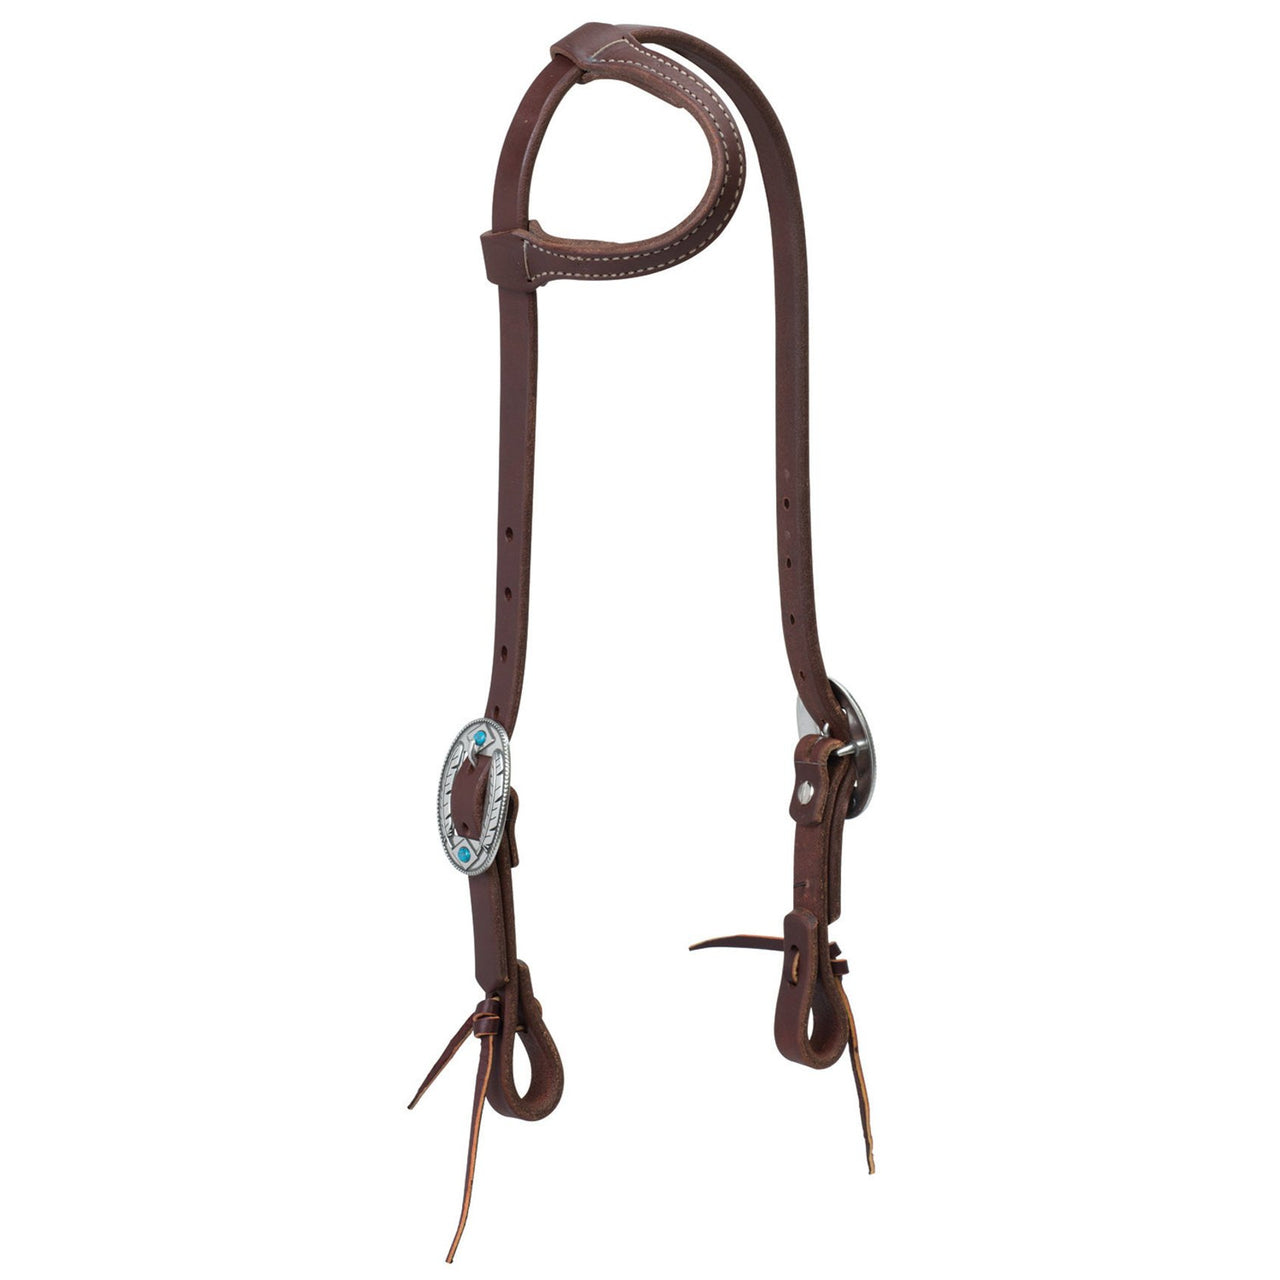 Weaver Leather Working Tack Feather Designer Hardware Sliding Ear Headstall - Canyon Rose